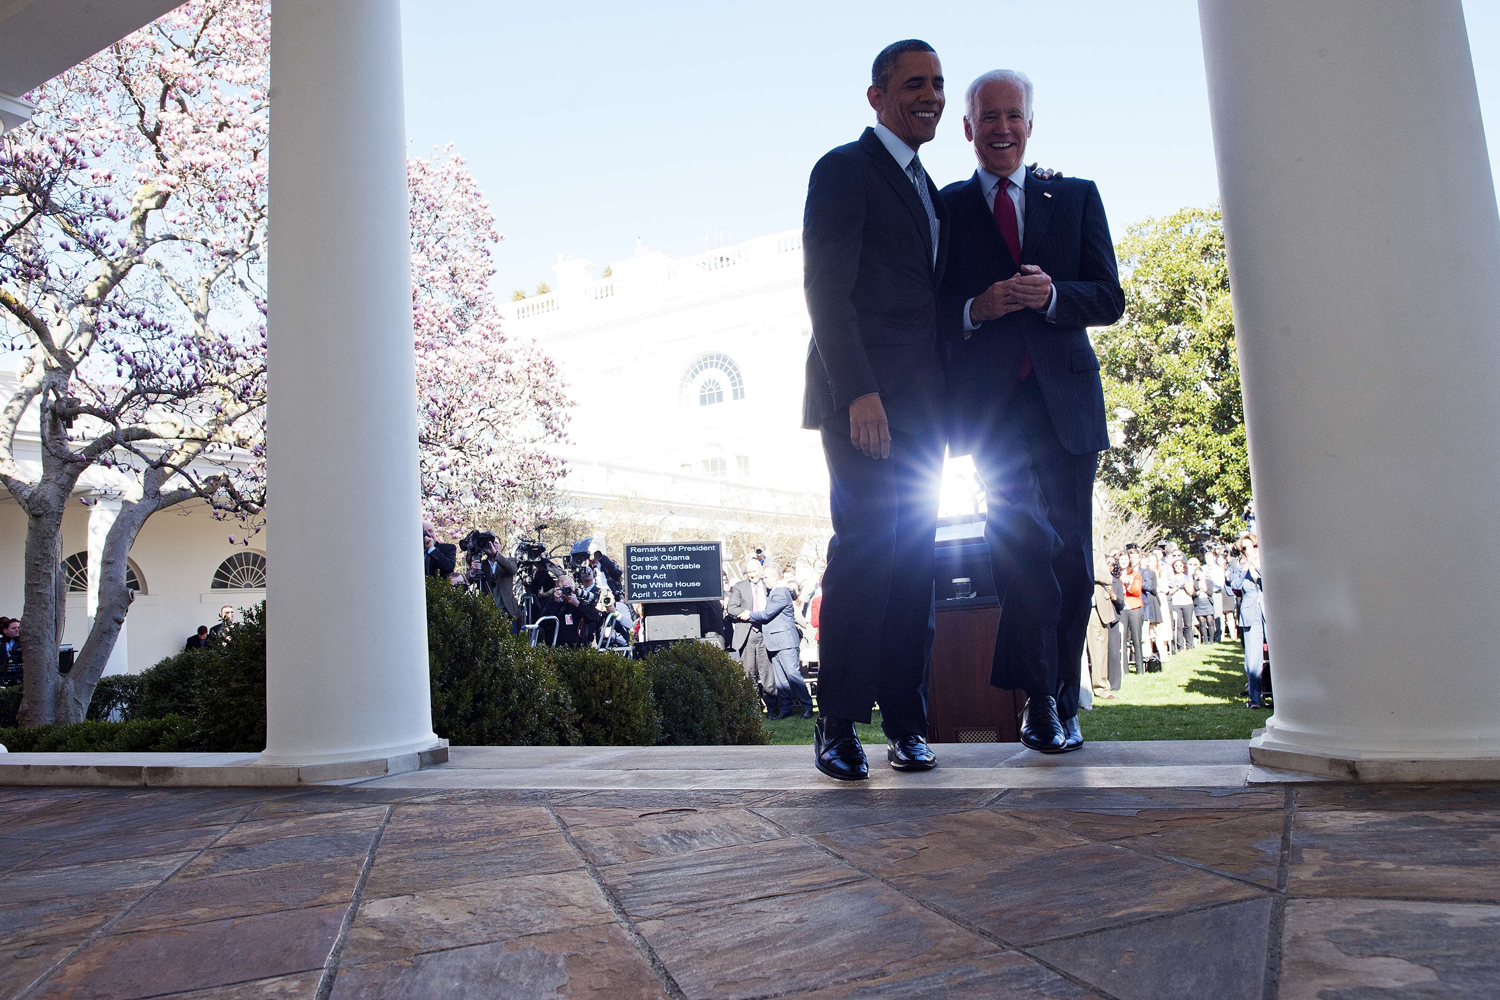 Apr. 1, 2014. US President Barack Obama walks back to the Oval Office with Vice President Joe Biden after he delivered a statement on the Affordable Care Act at the Rose Garden of the White House in Washington, DC.